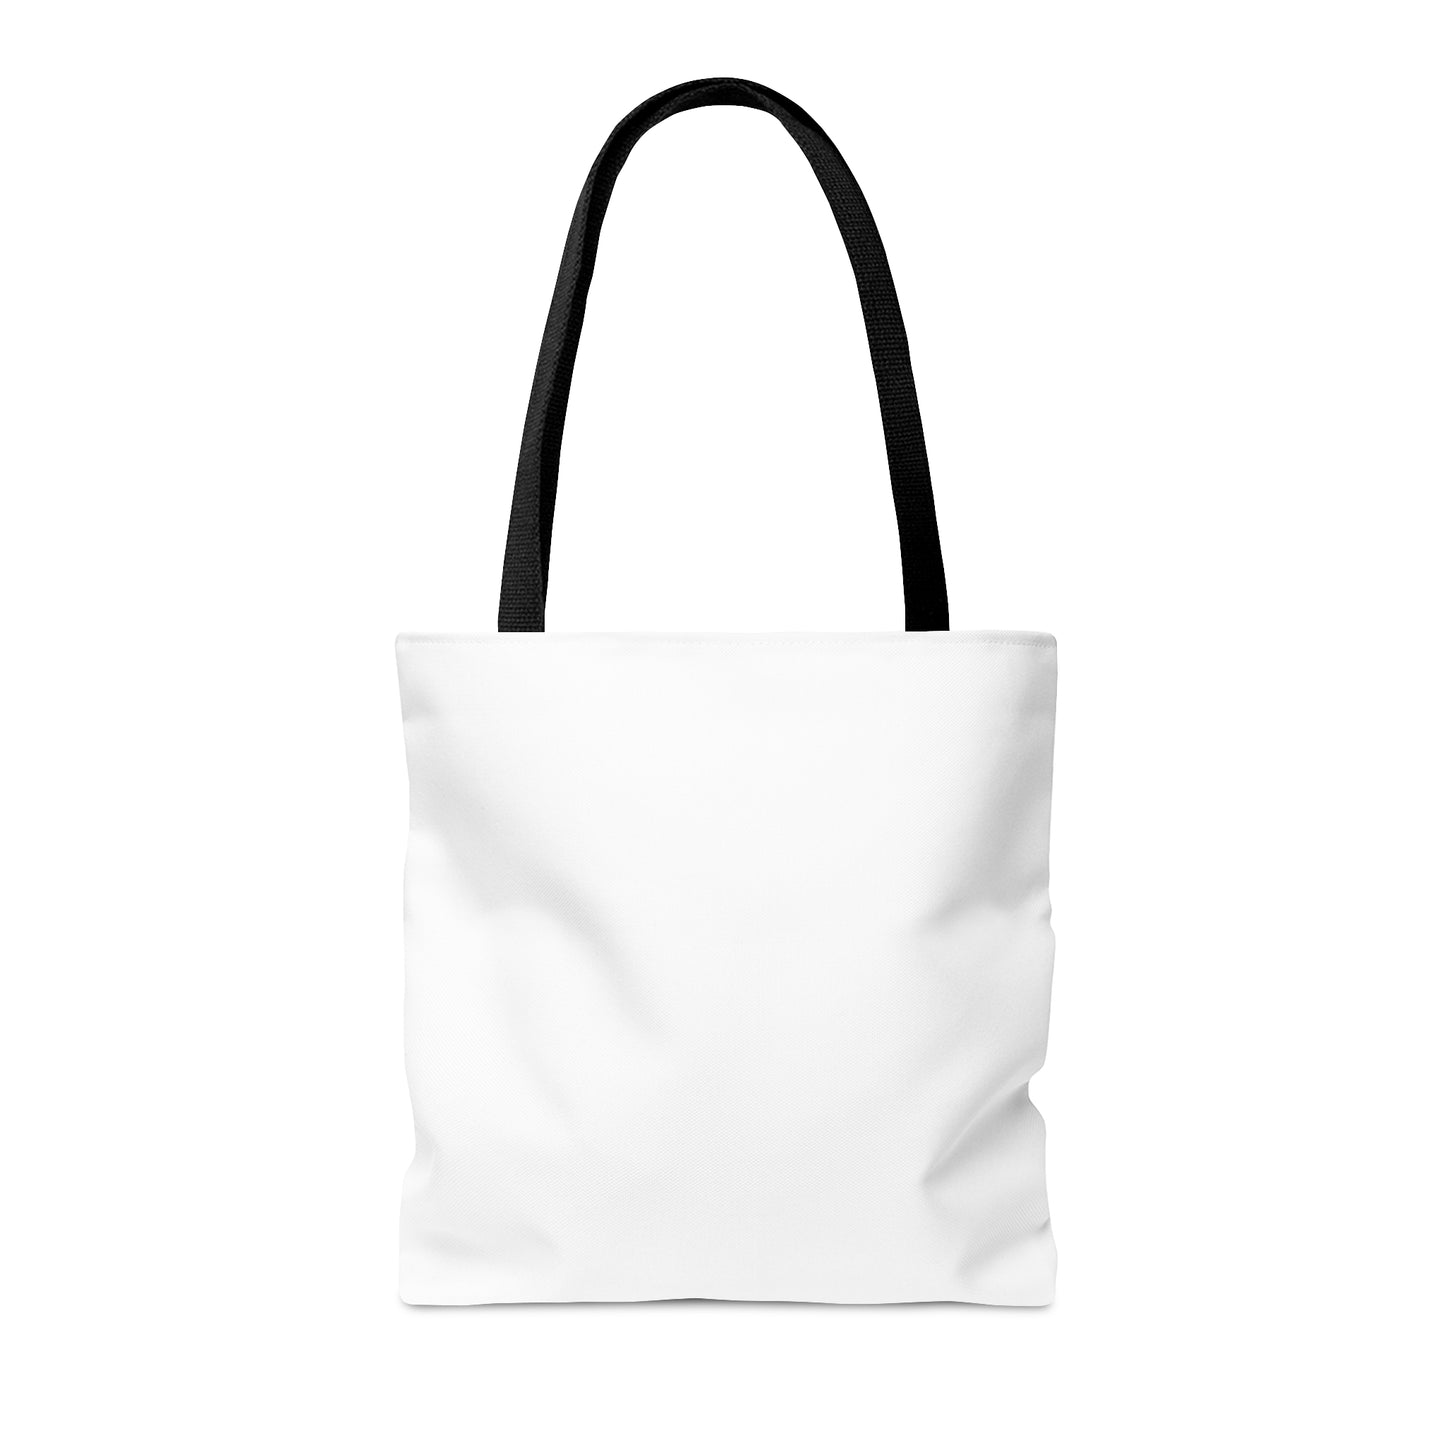 Adoration of the Kings-Tote Bag